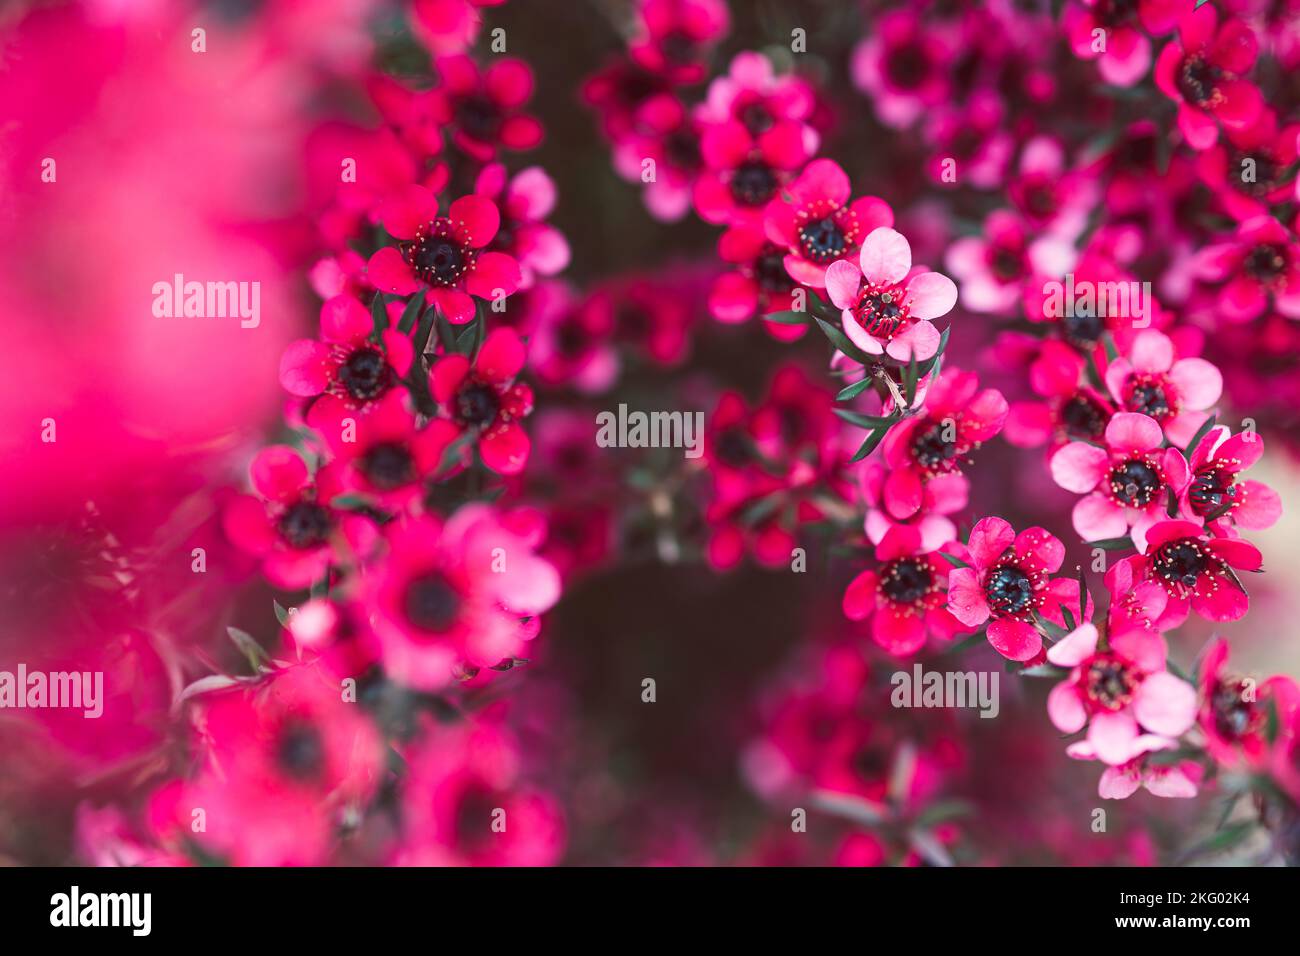 close-up of pink flowers flom a New Zealand Tea Bush plant with dark leaves shot at shallow depth of field Stock Photo